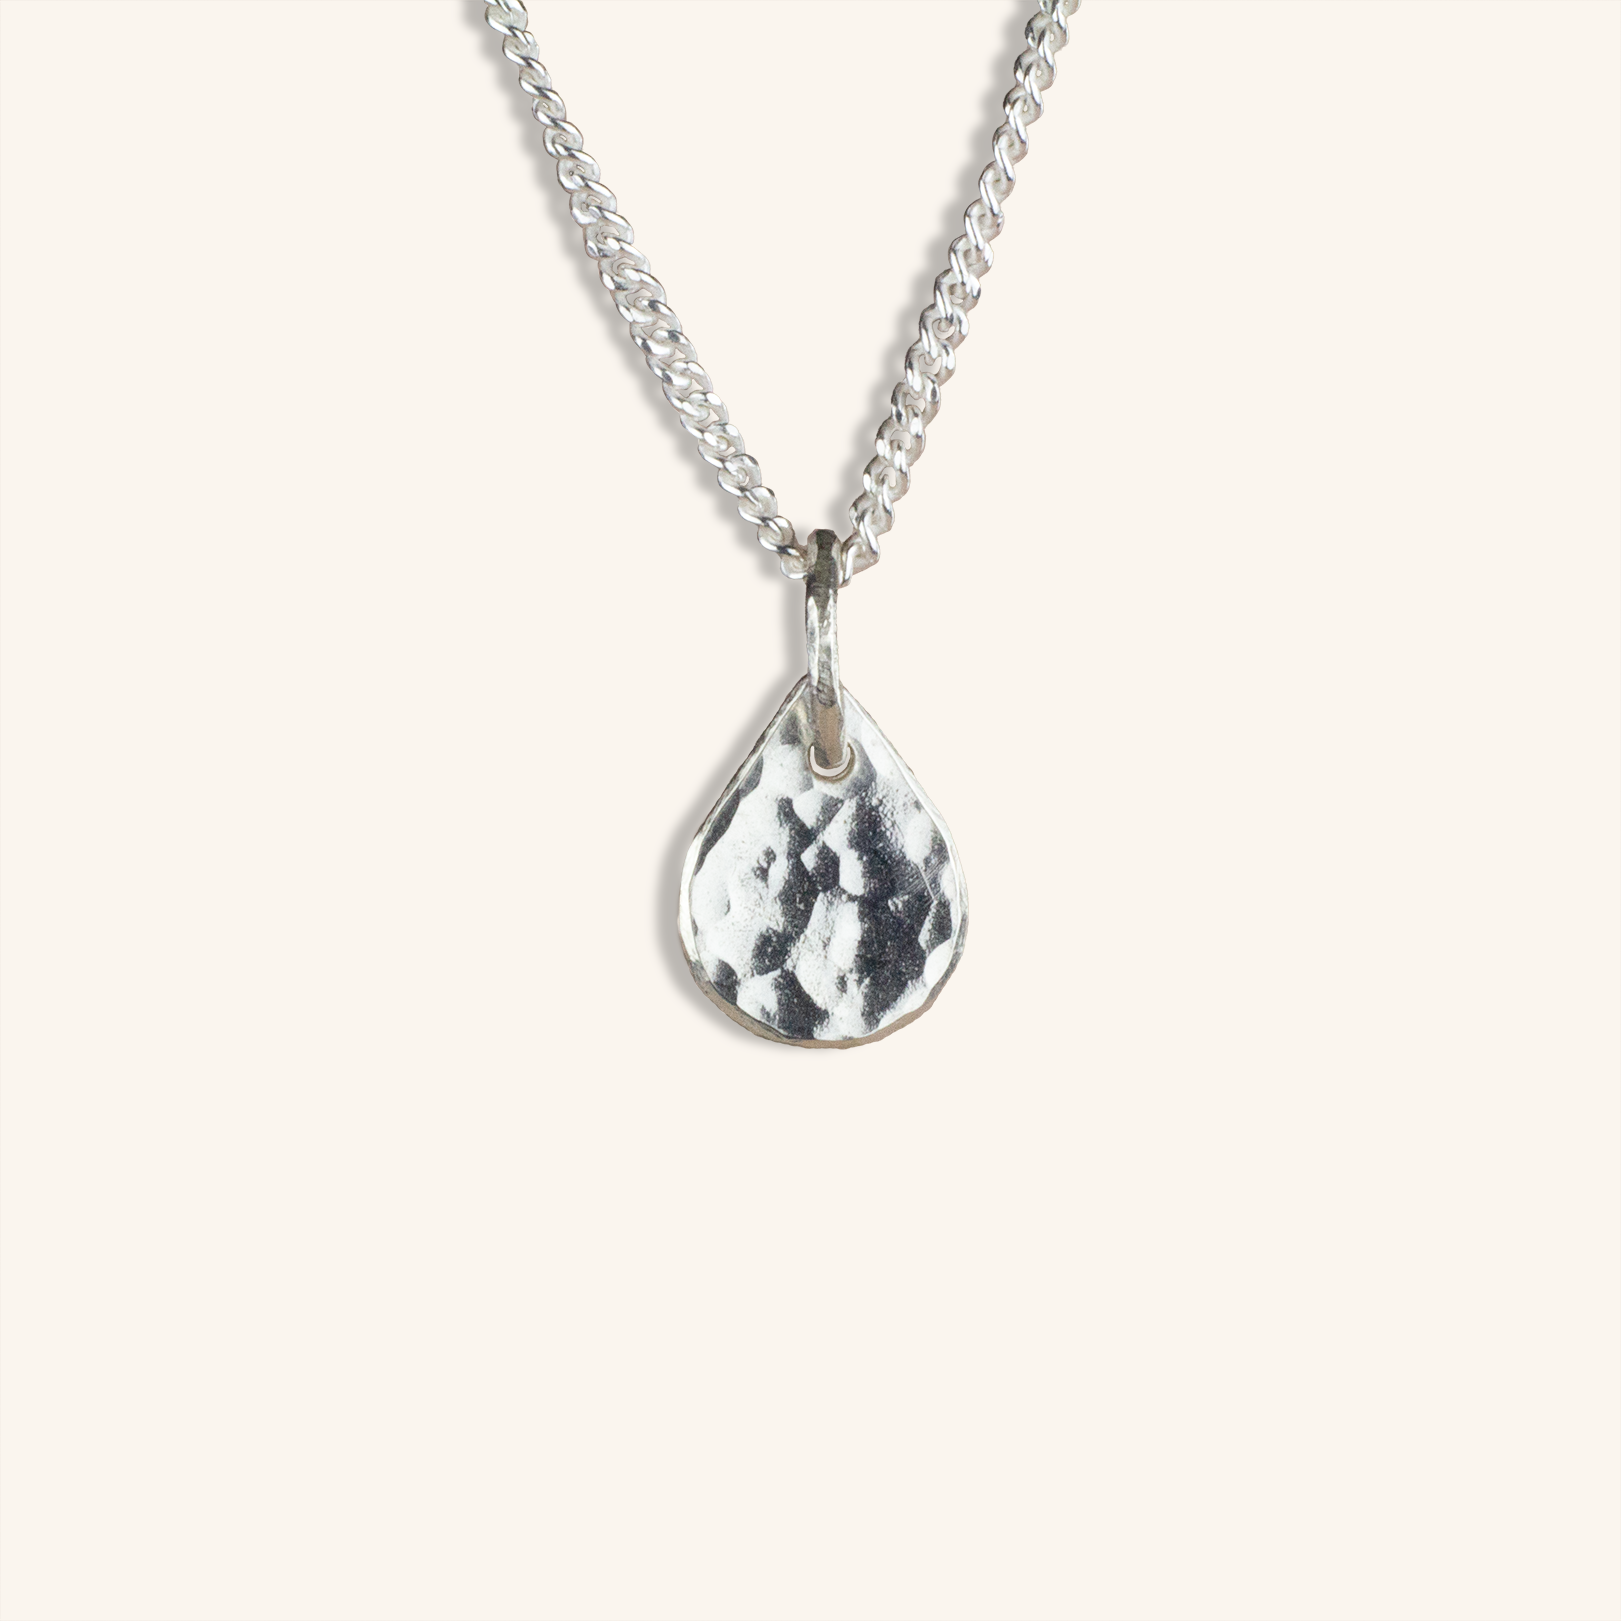 Tears of hope, Pendant Necklace Silver